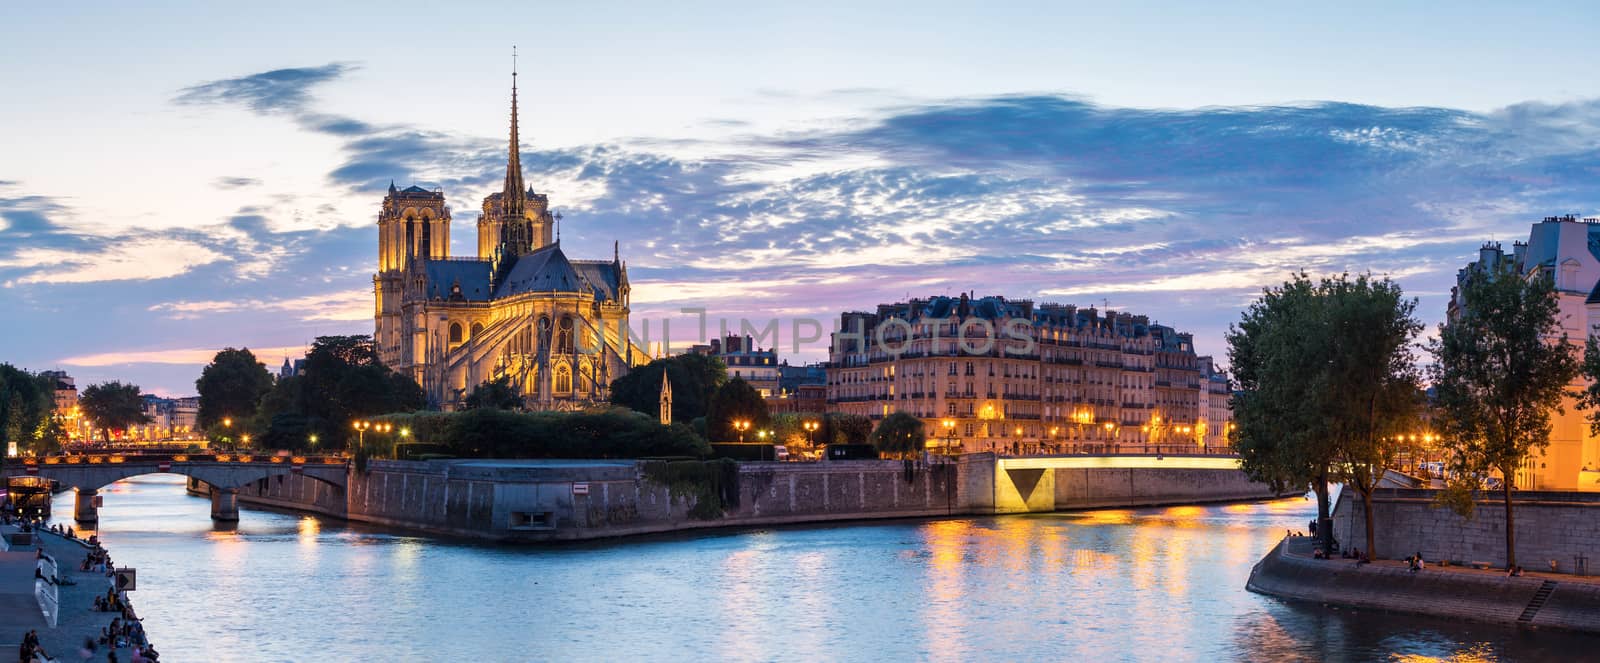 Paris Notre Dame Panorama by vichie81